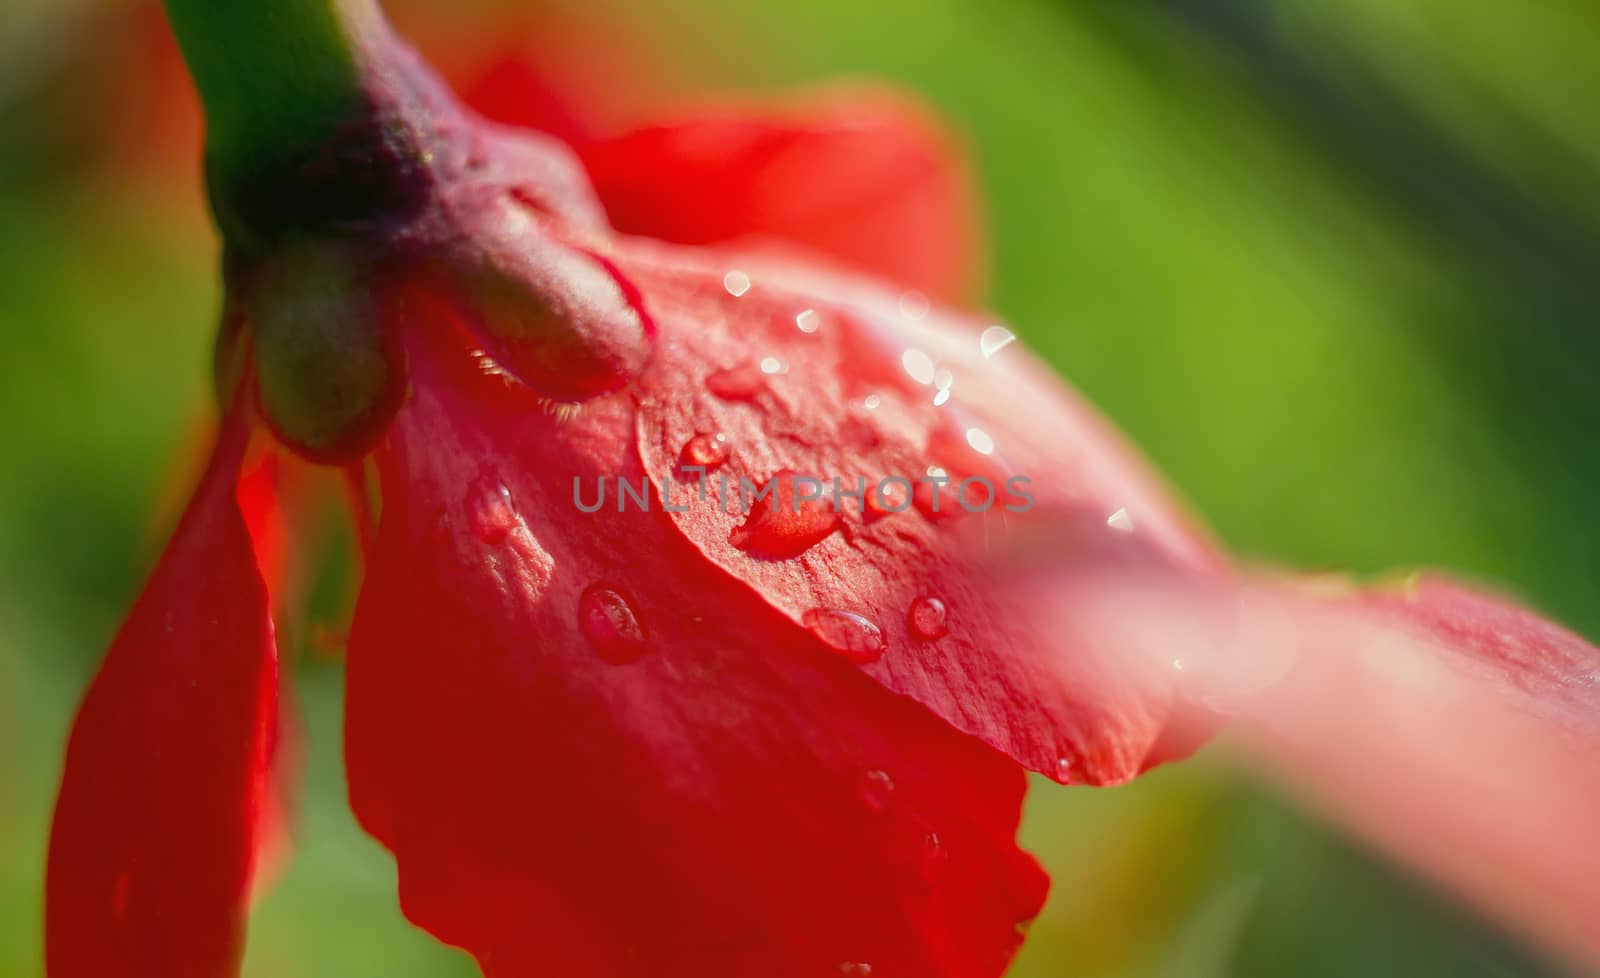 red flower close-up on a green background with drops of dew